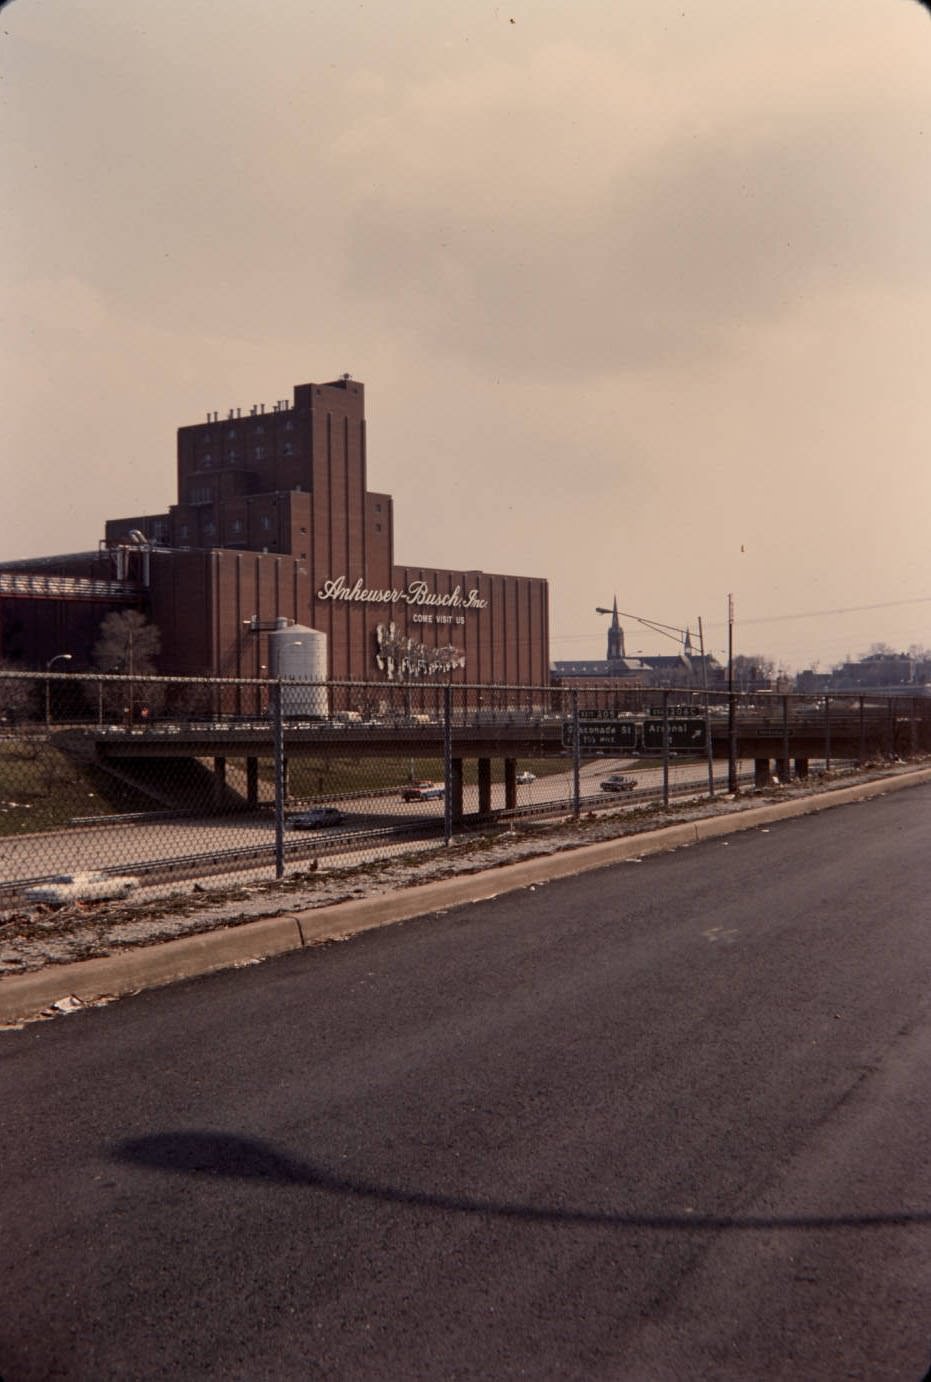 Anheuser-Busch Brewery from 18th Street, 1977